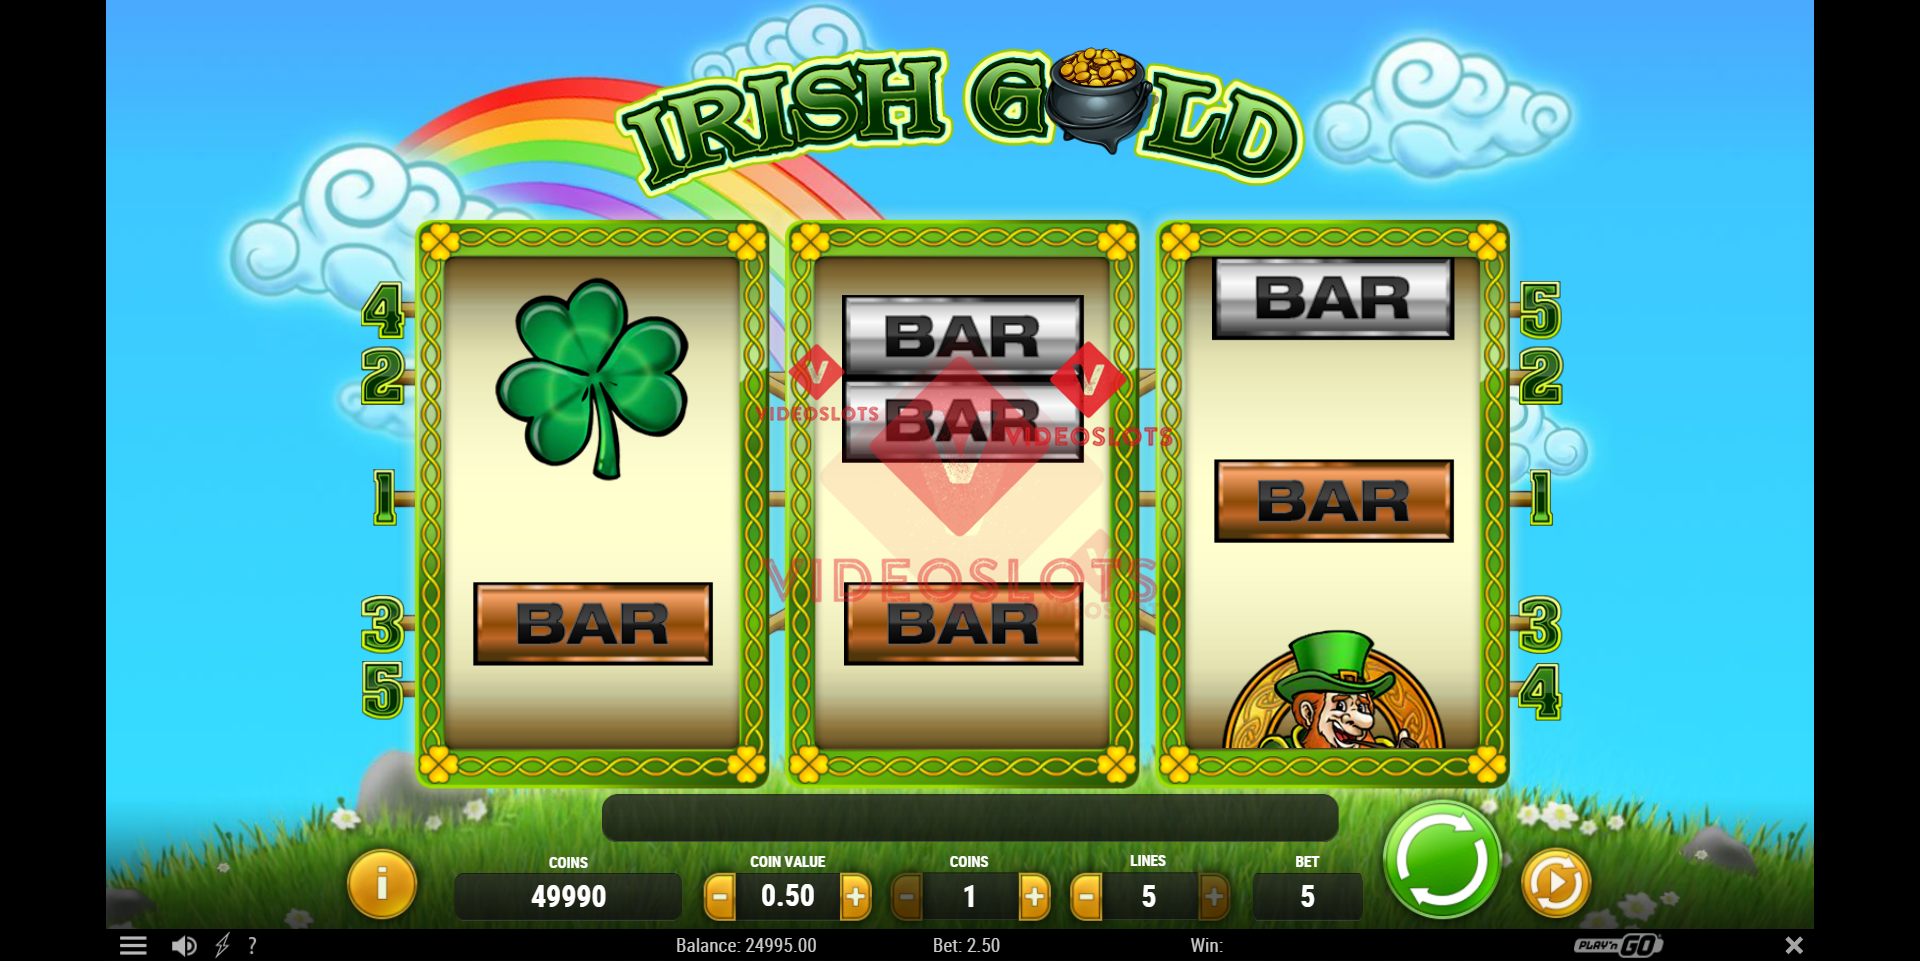 Base Game for Irish Gold slot from Play'n Go